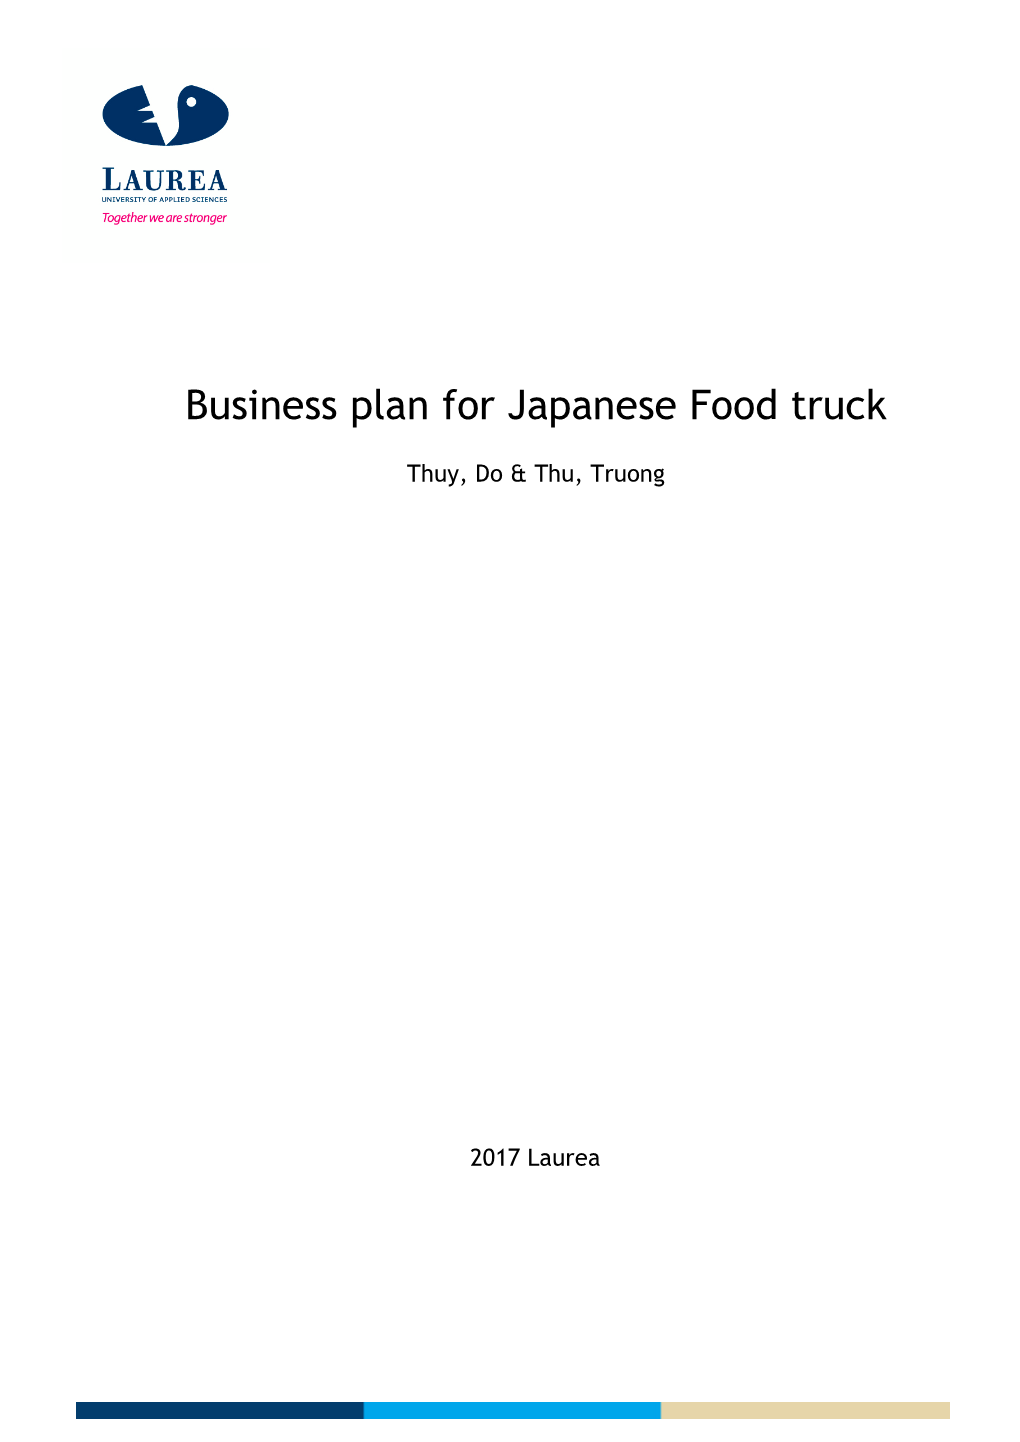 Business Plan for Japanese Food Truck